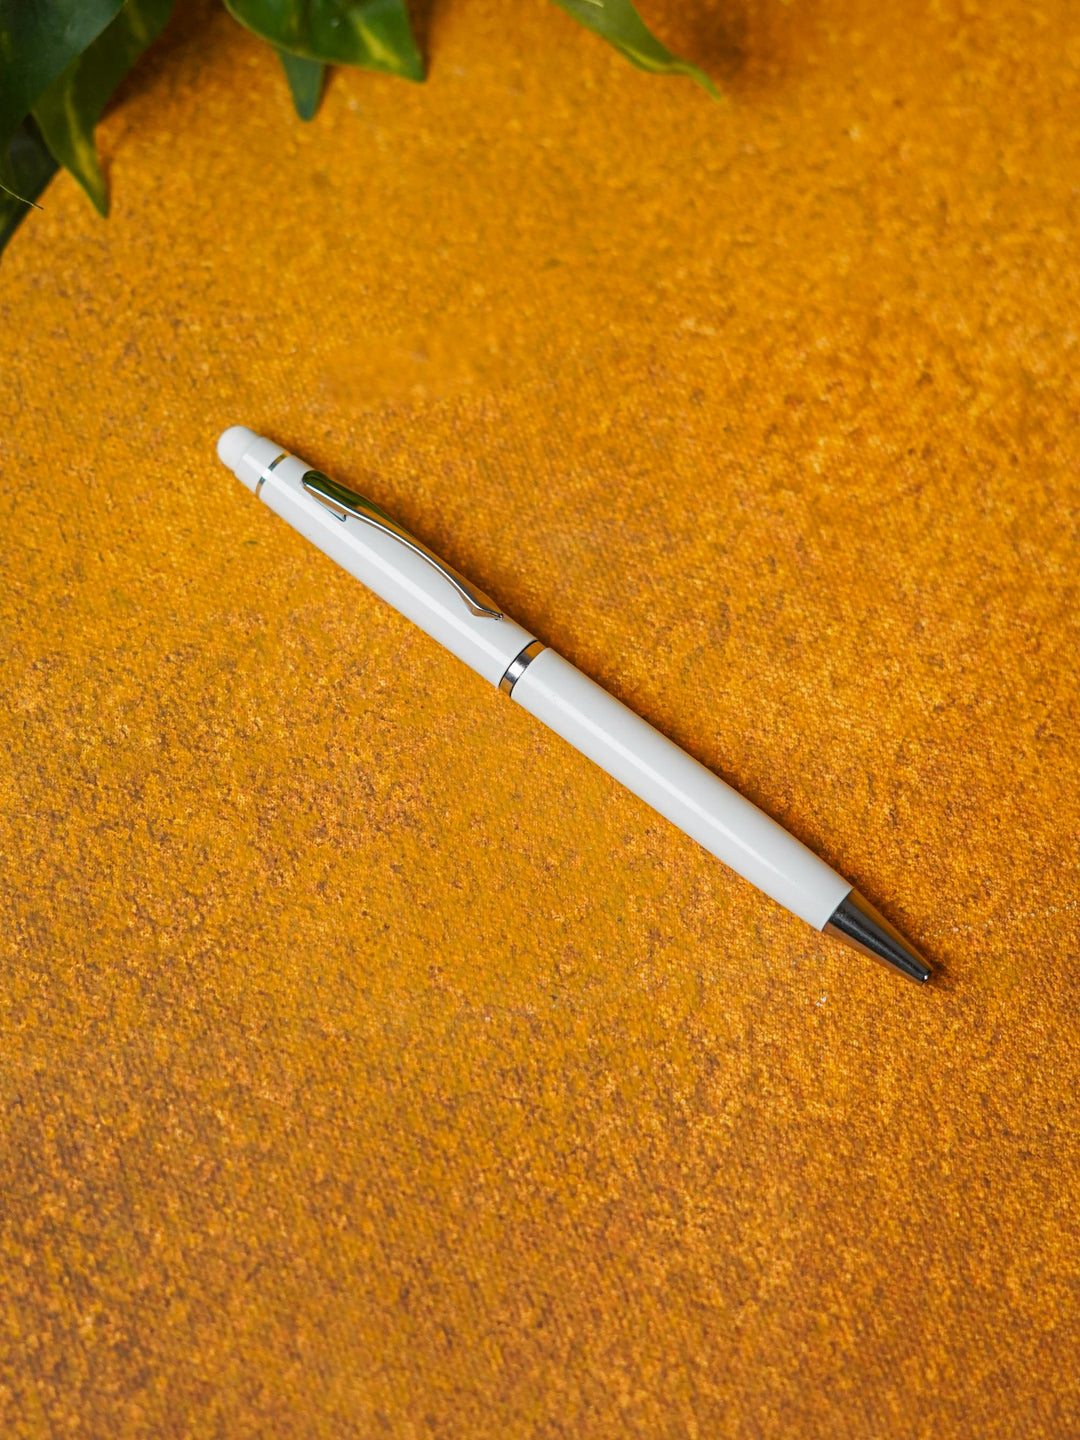 Touch Screen Tip Roller Pen (Pearl White Finish) - BCG0160